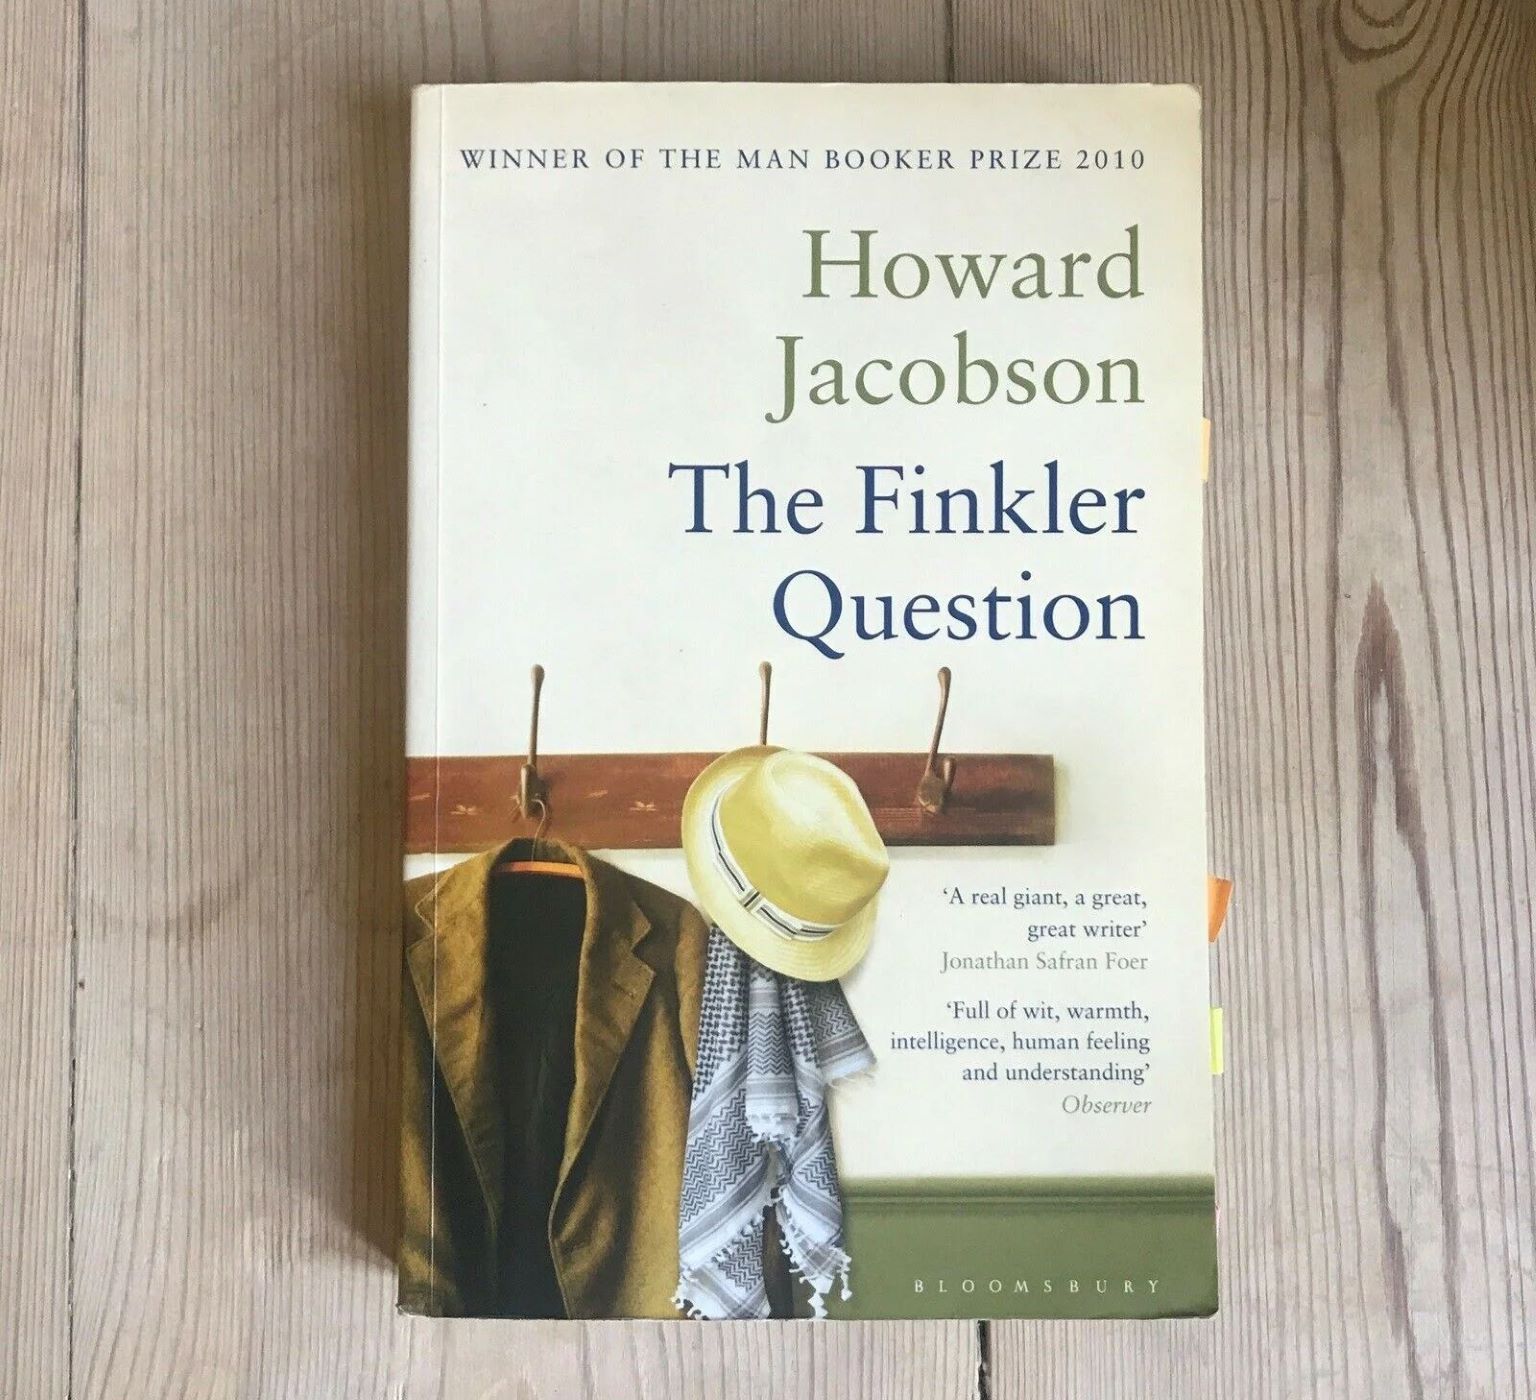 12-astonishing-facts-about-the-finkler-question-howard-jacobson